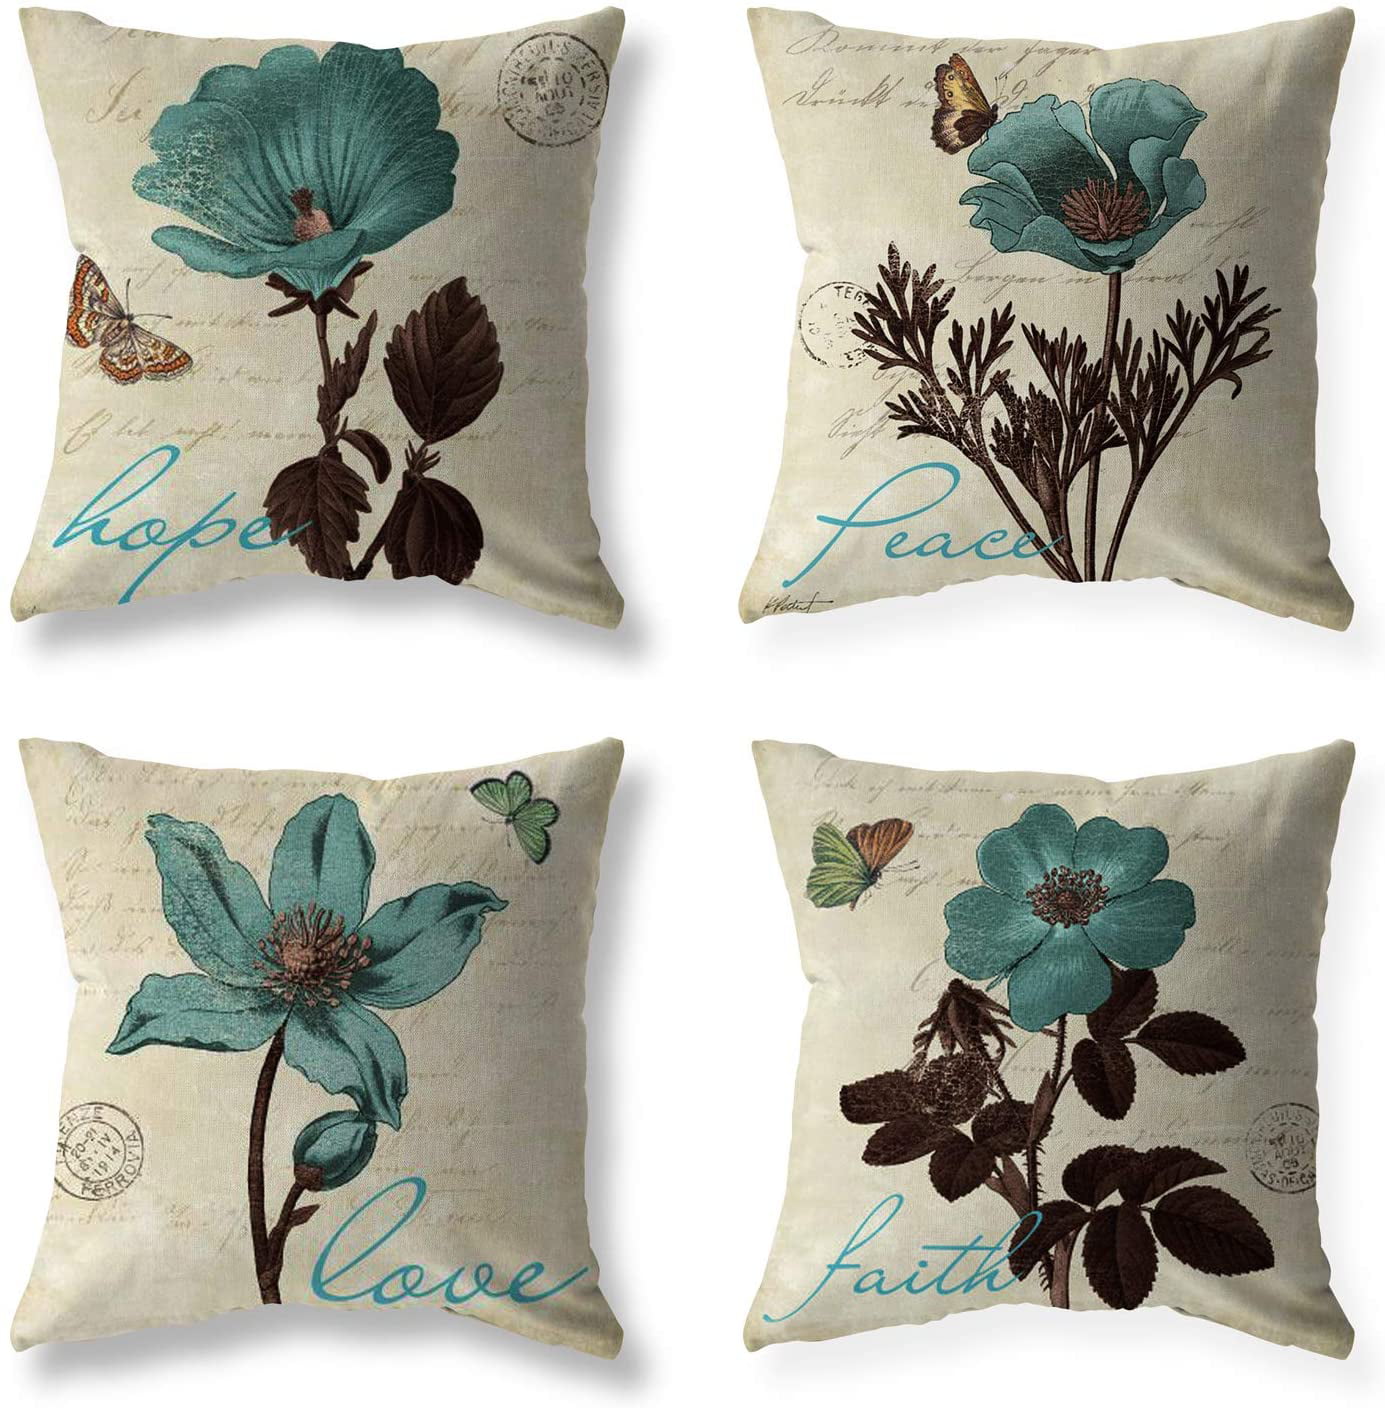 Beauty Flowers Printed Sofa Cushion Throw Pillows Cover Pillow Cases Home Decor 